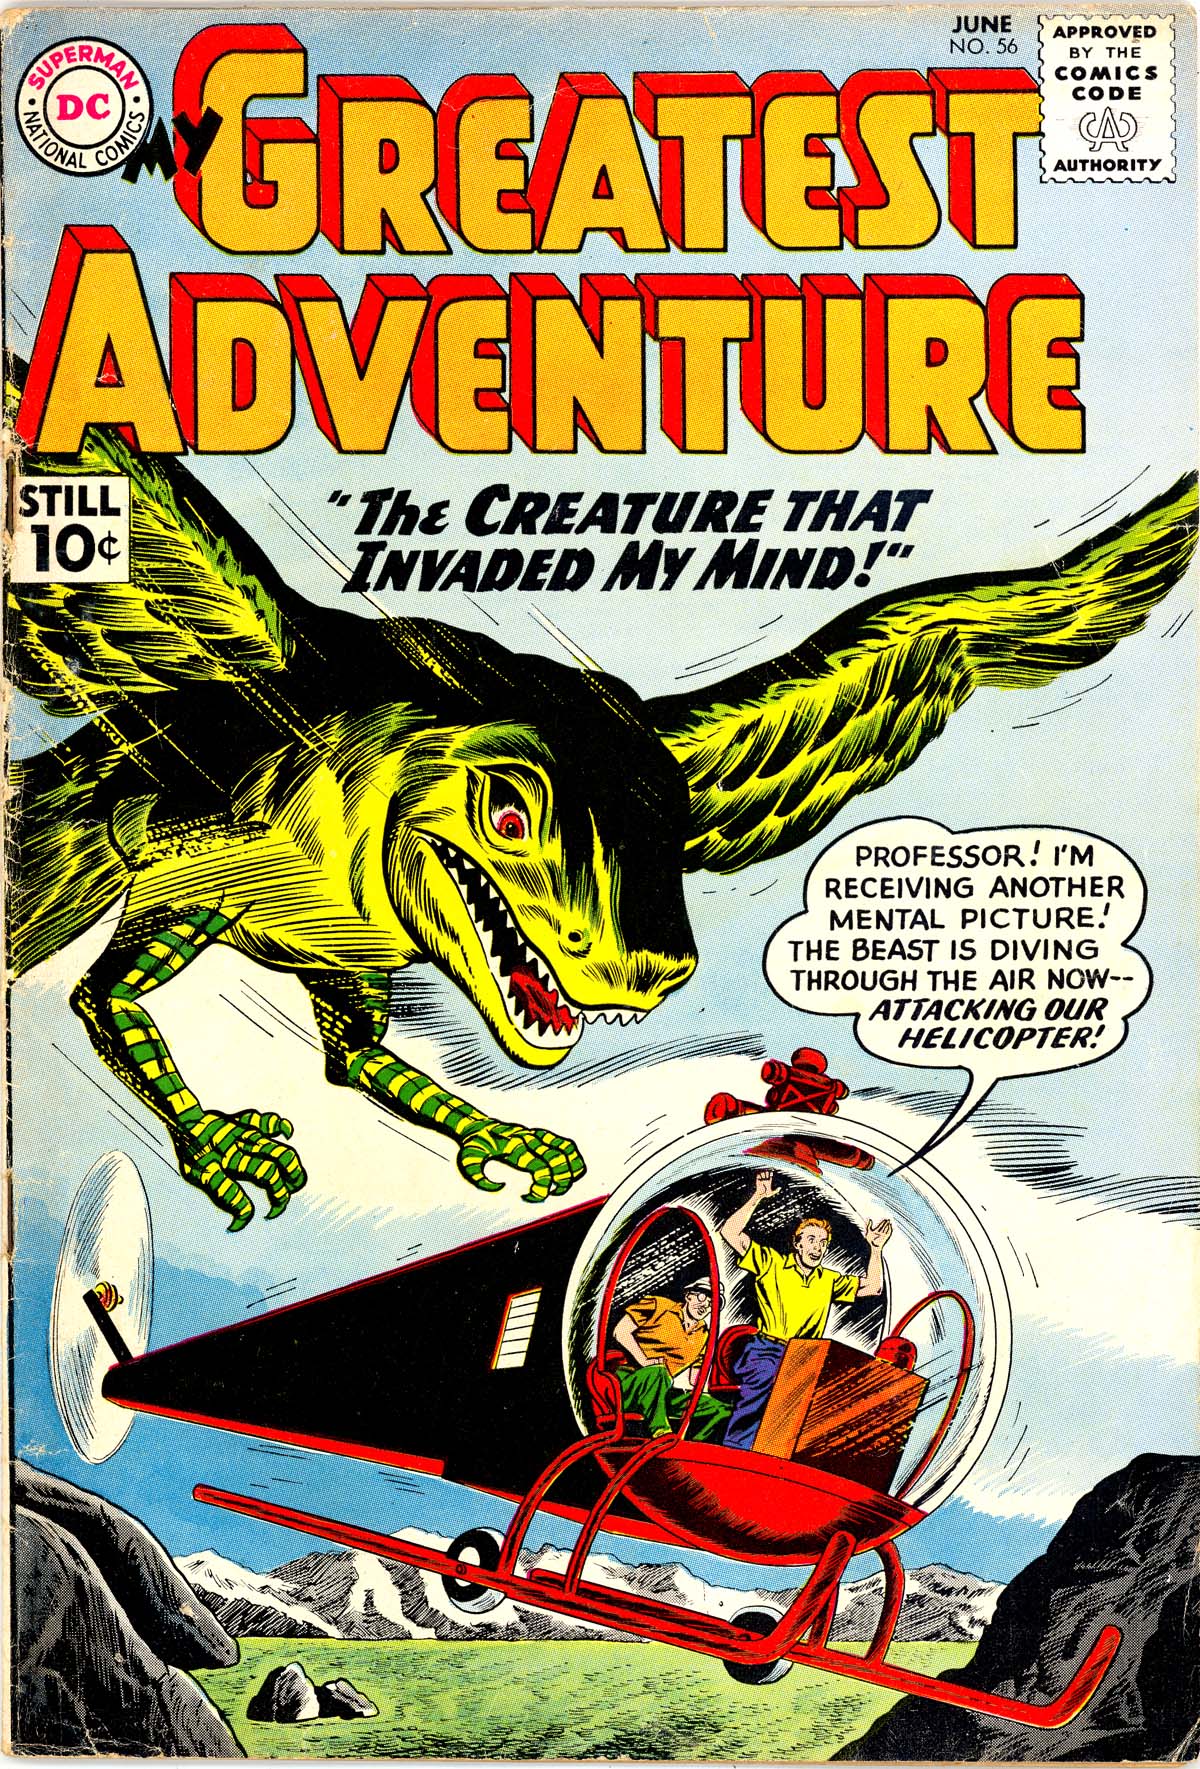 Read online My Greatest Adventure comic -  Issue #56 - 1